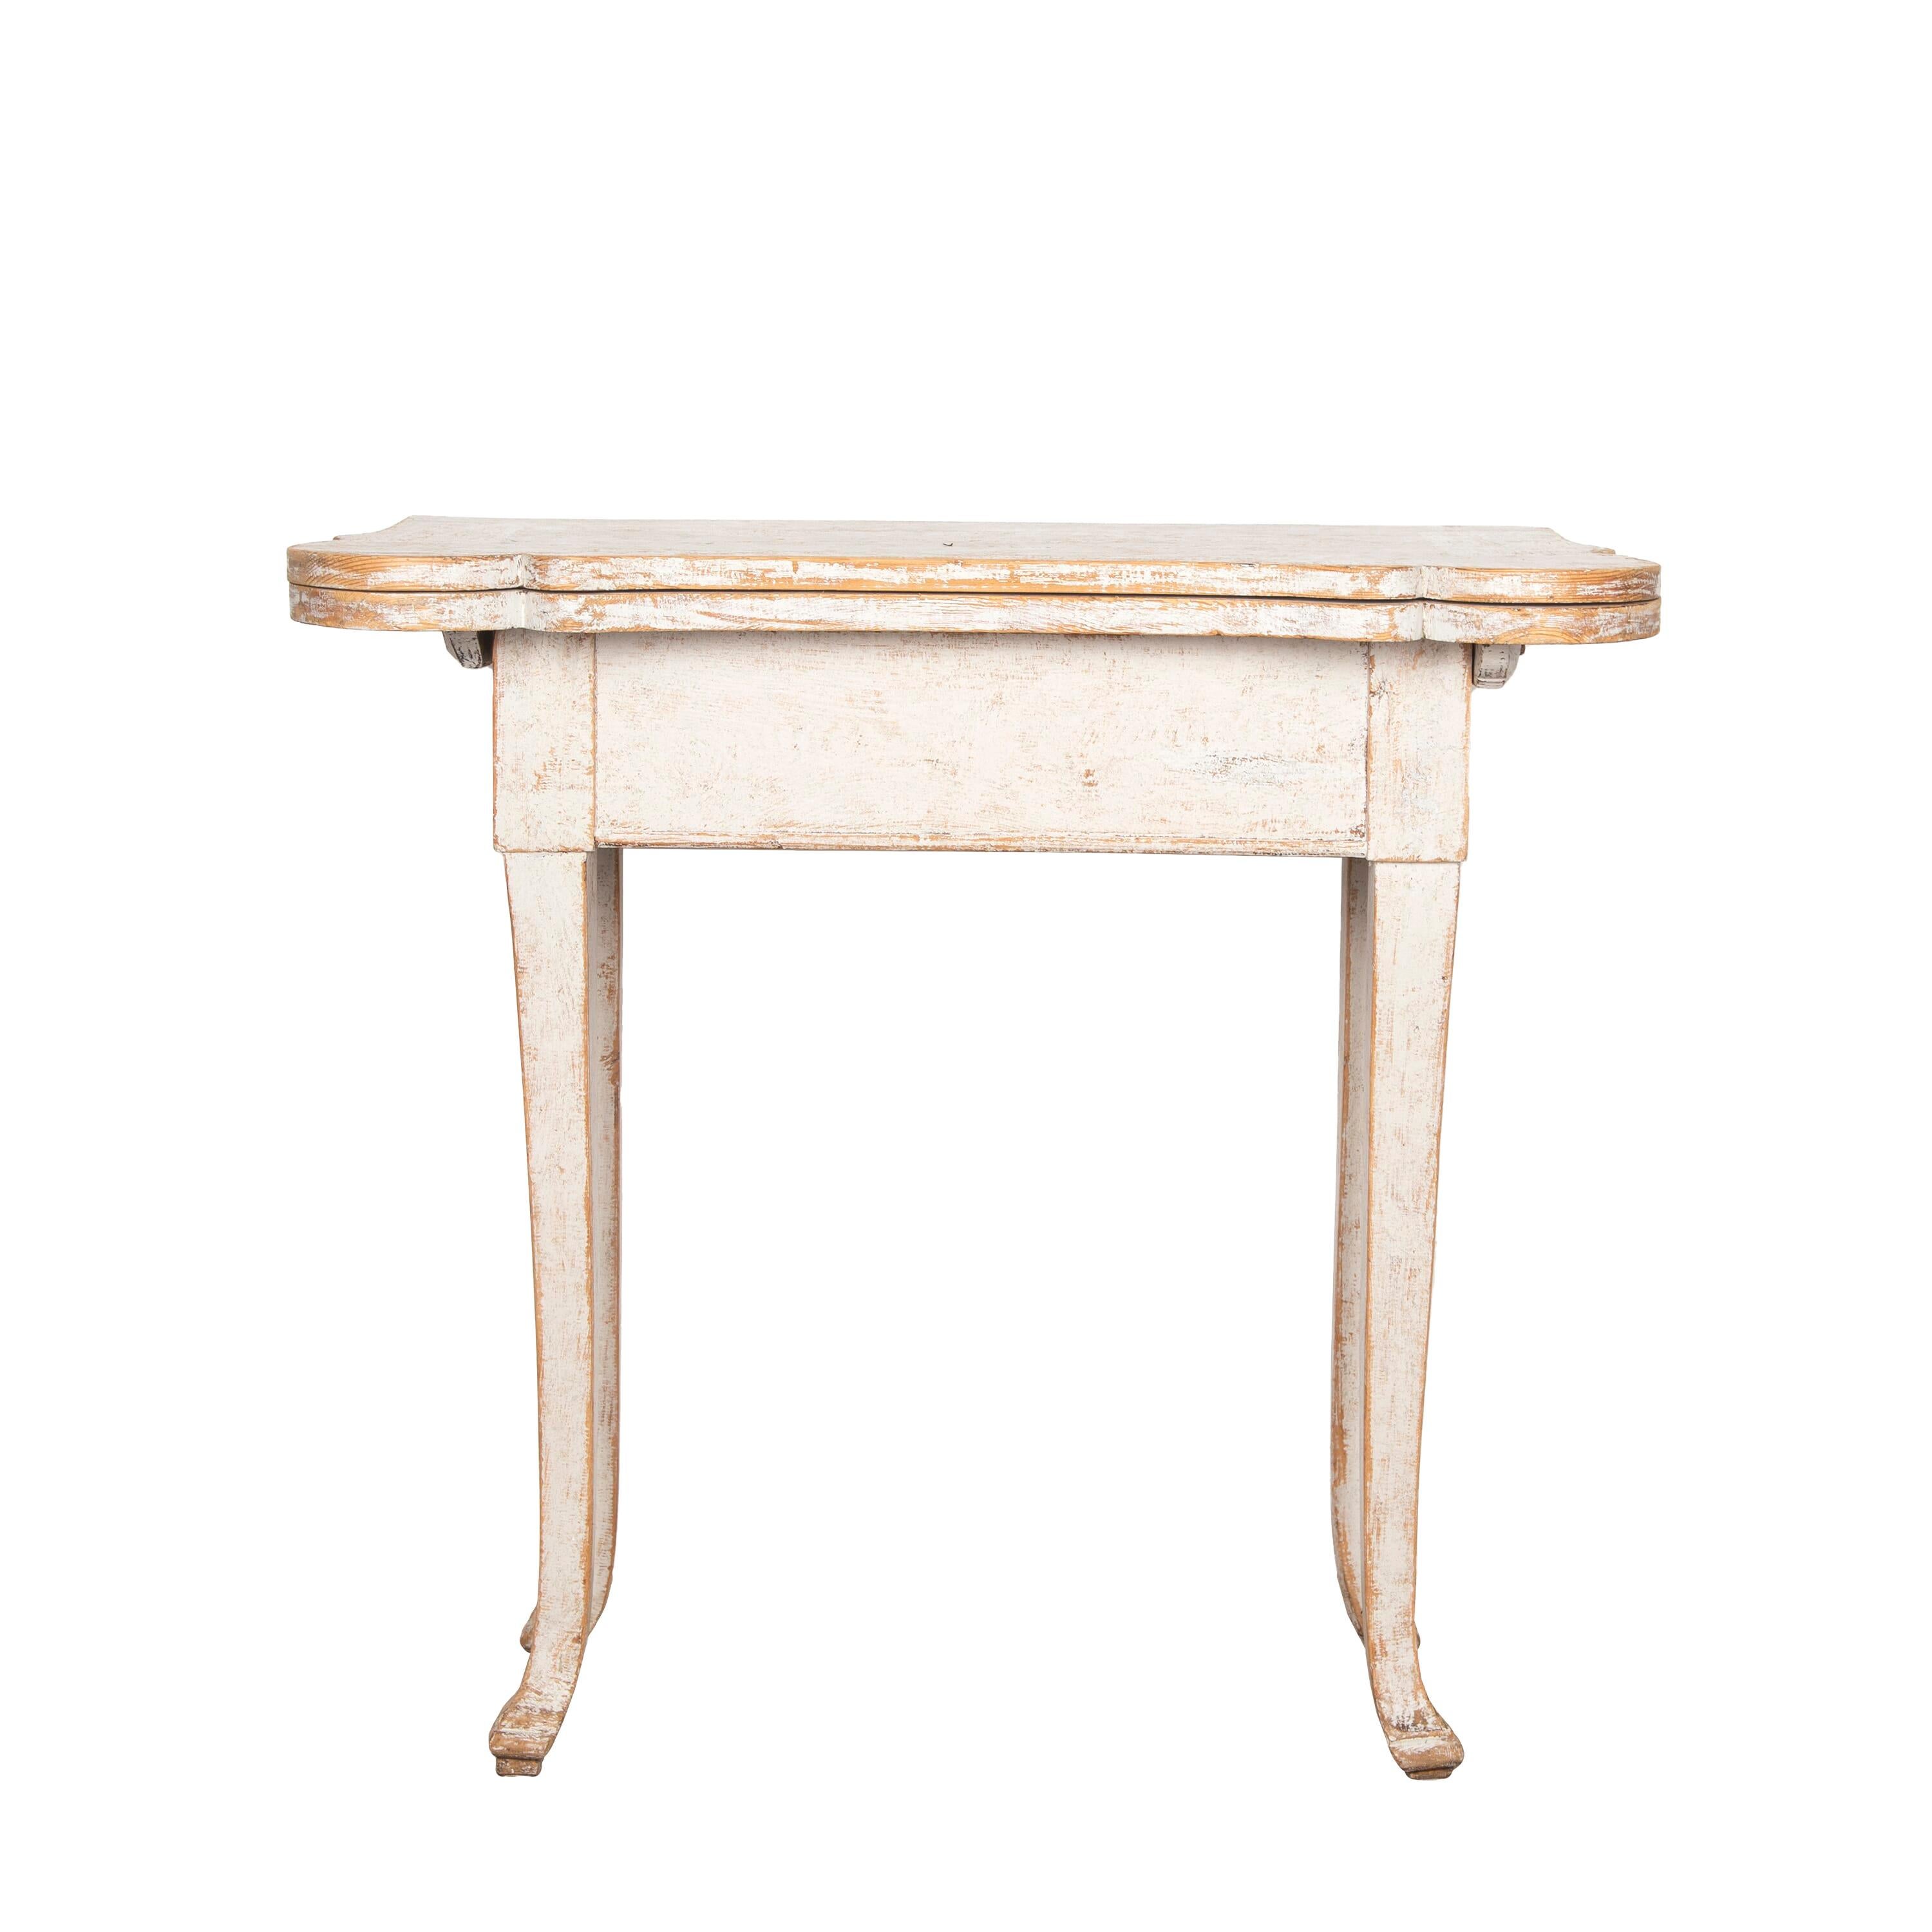 Unusual Swedish 18th century Rococo folding card table.
Repainted in soft grey and beautifully distressed.